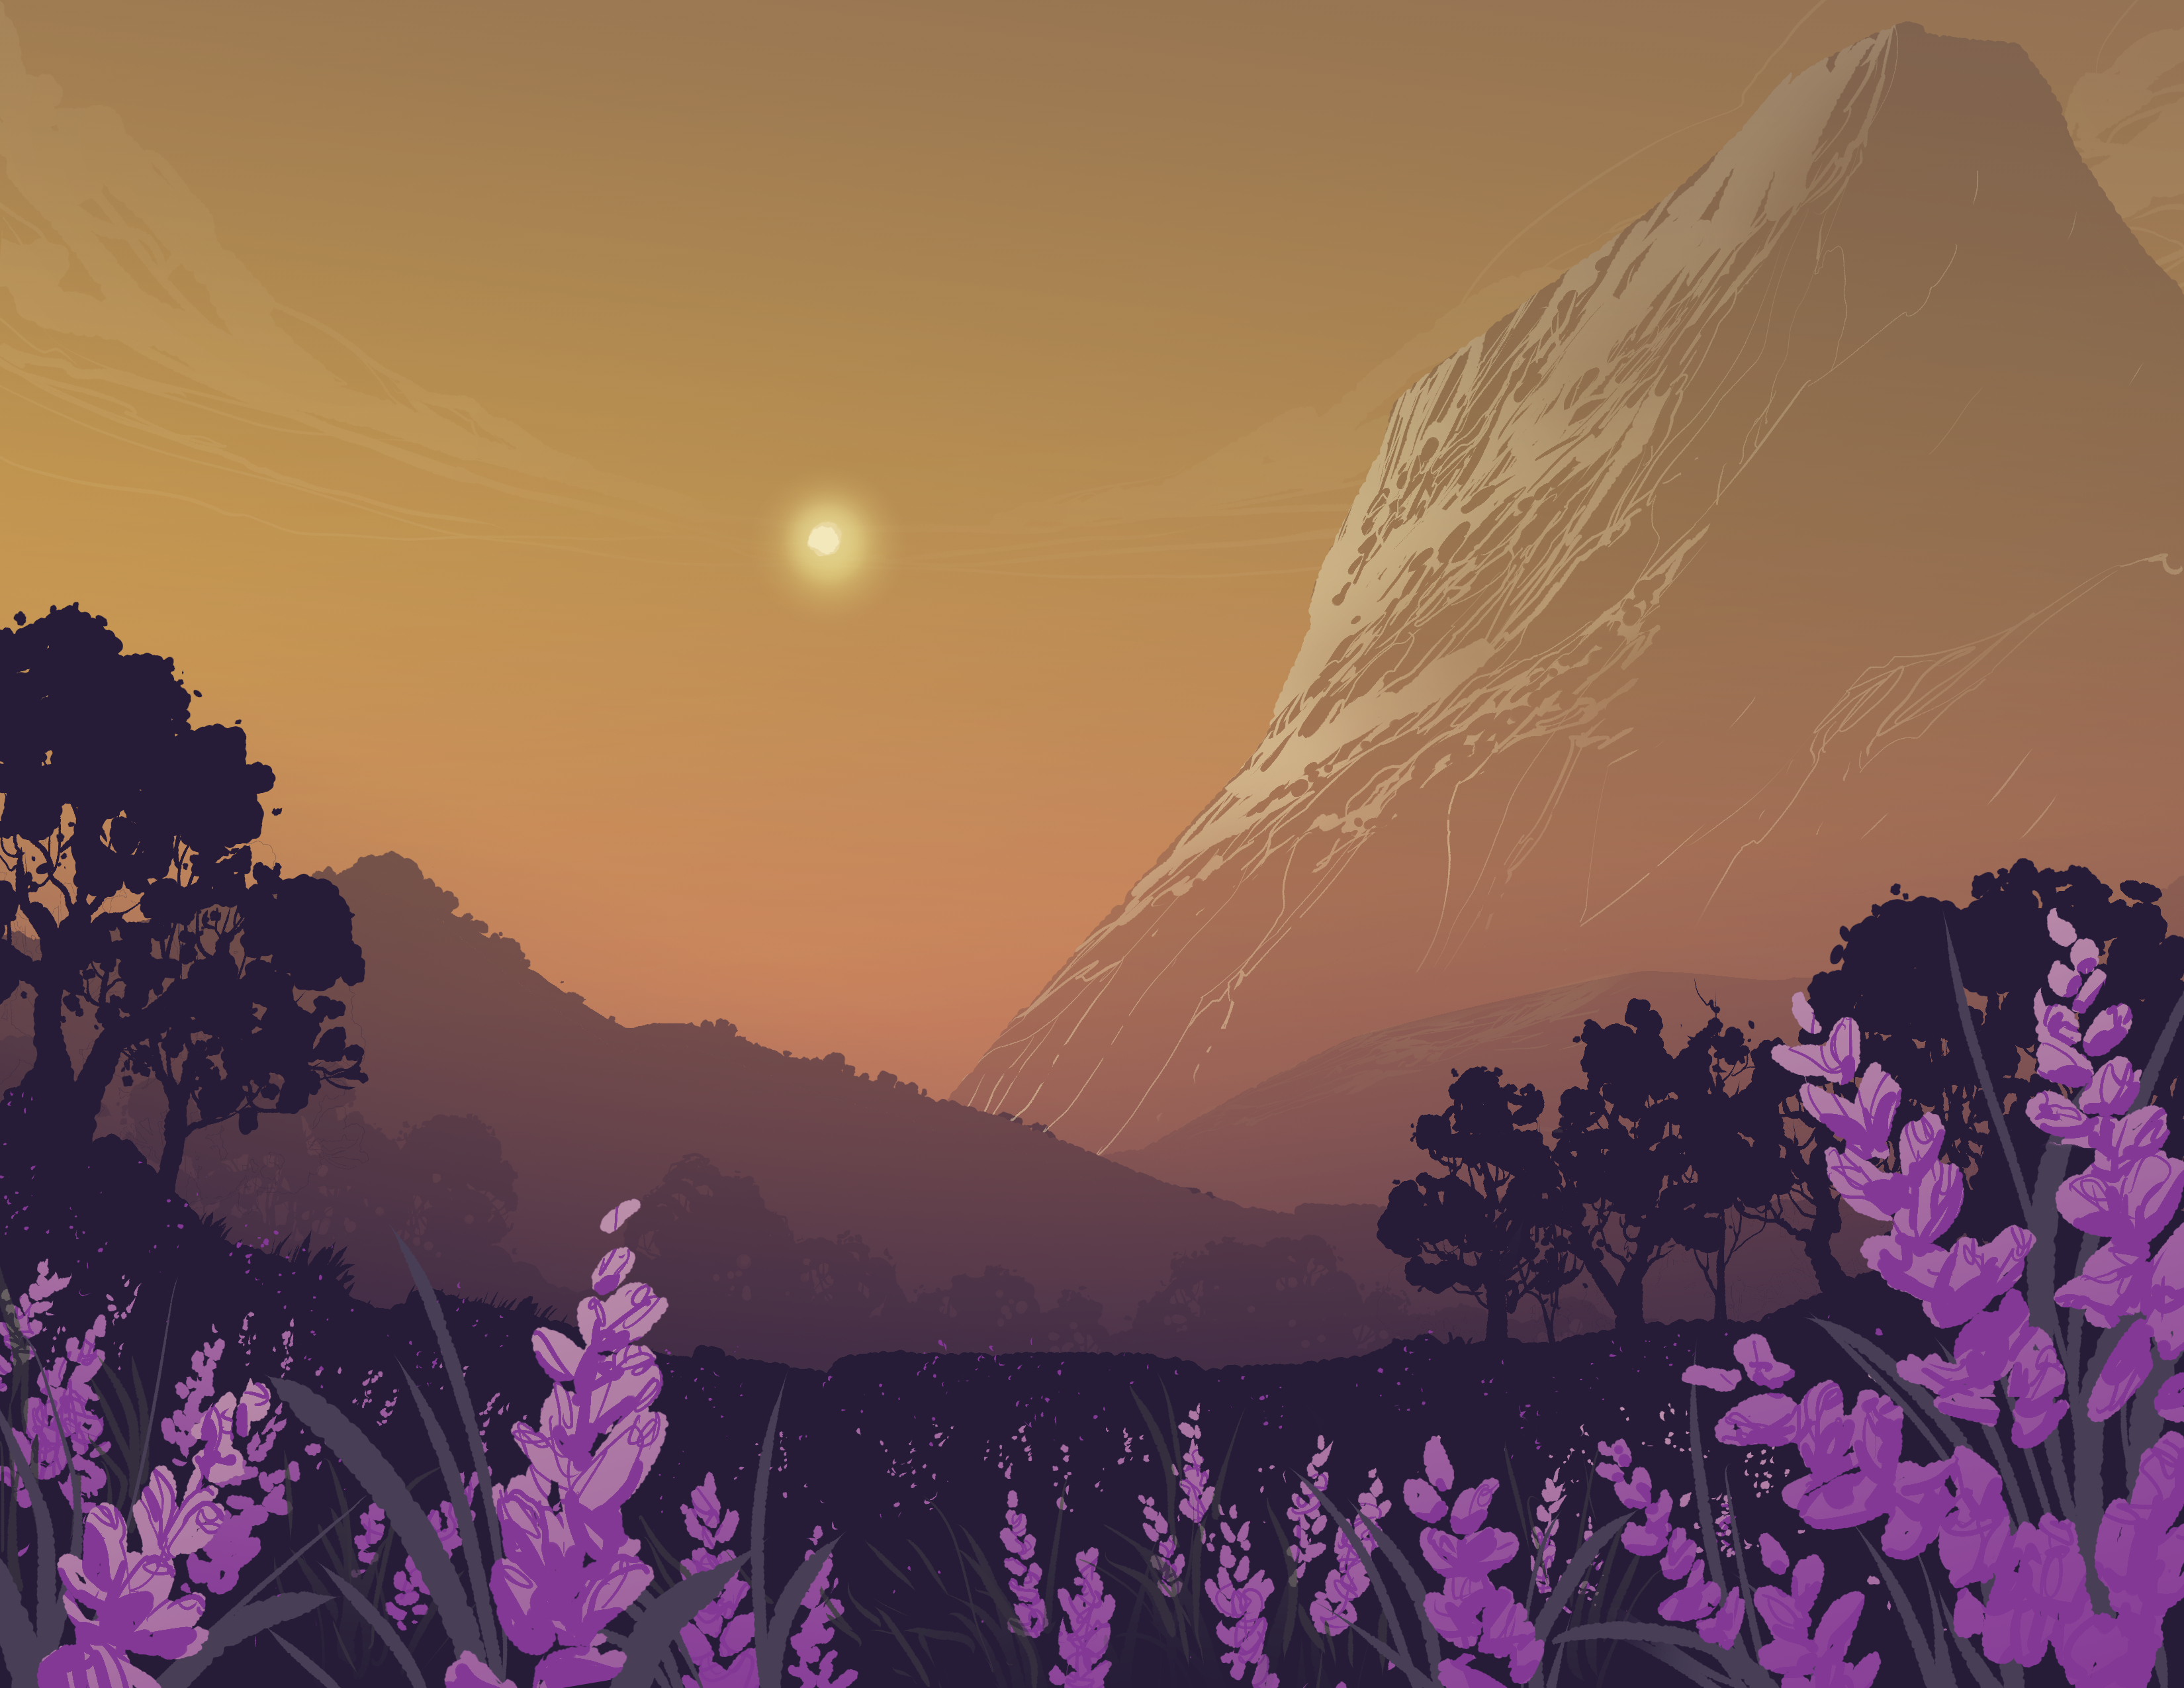 52727 download wallpaper art, flowers, mountains, vector, landscape, trees, sun, lavender screensavers and pictures for free